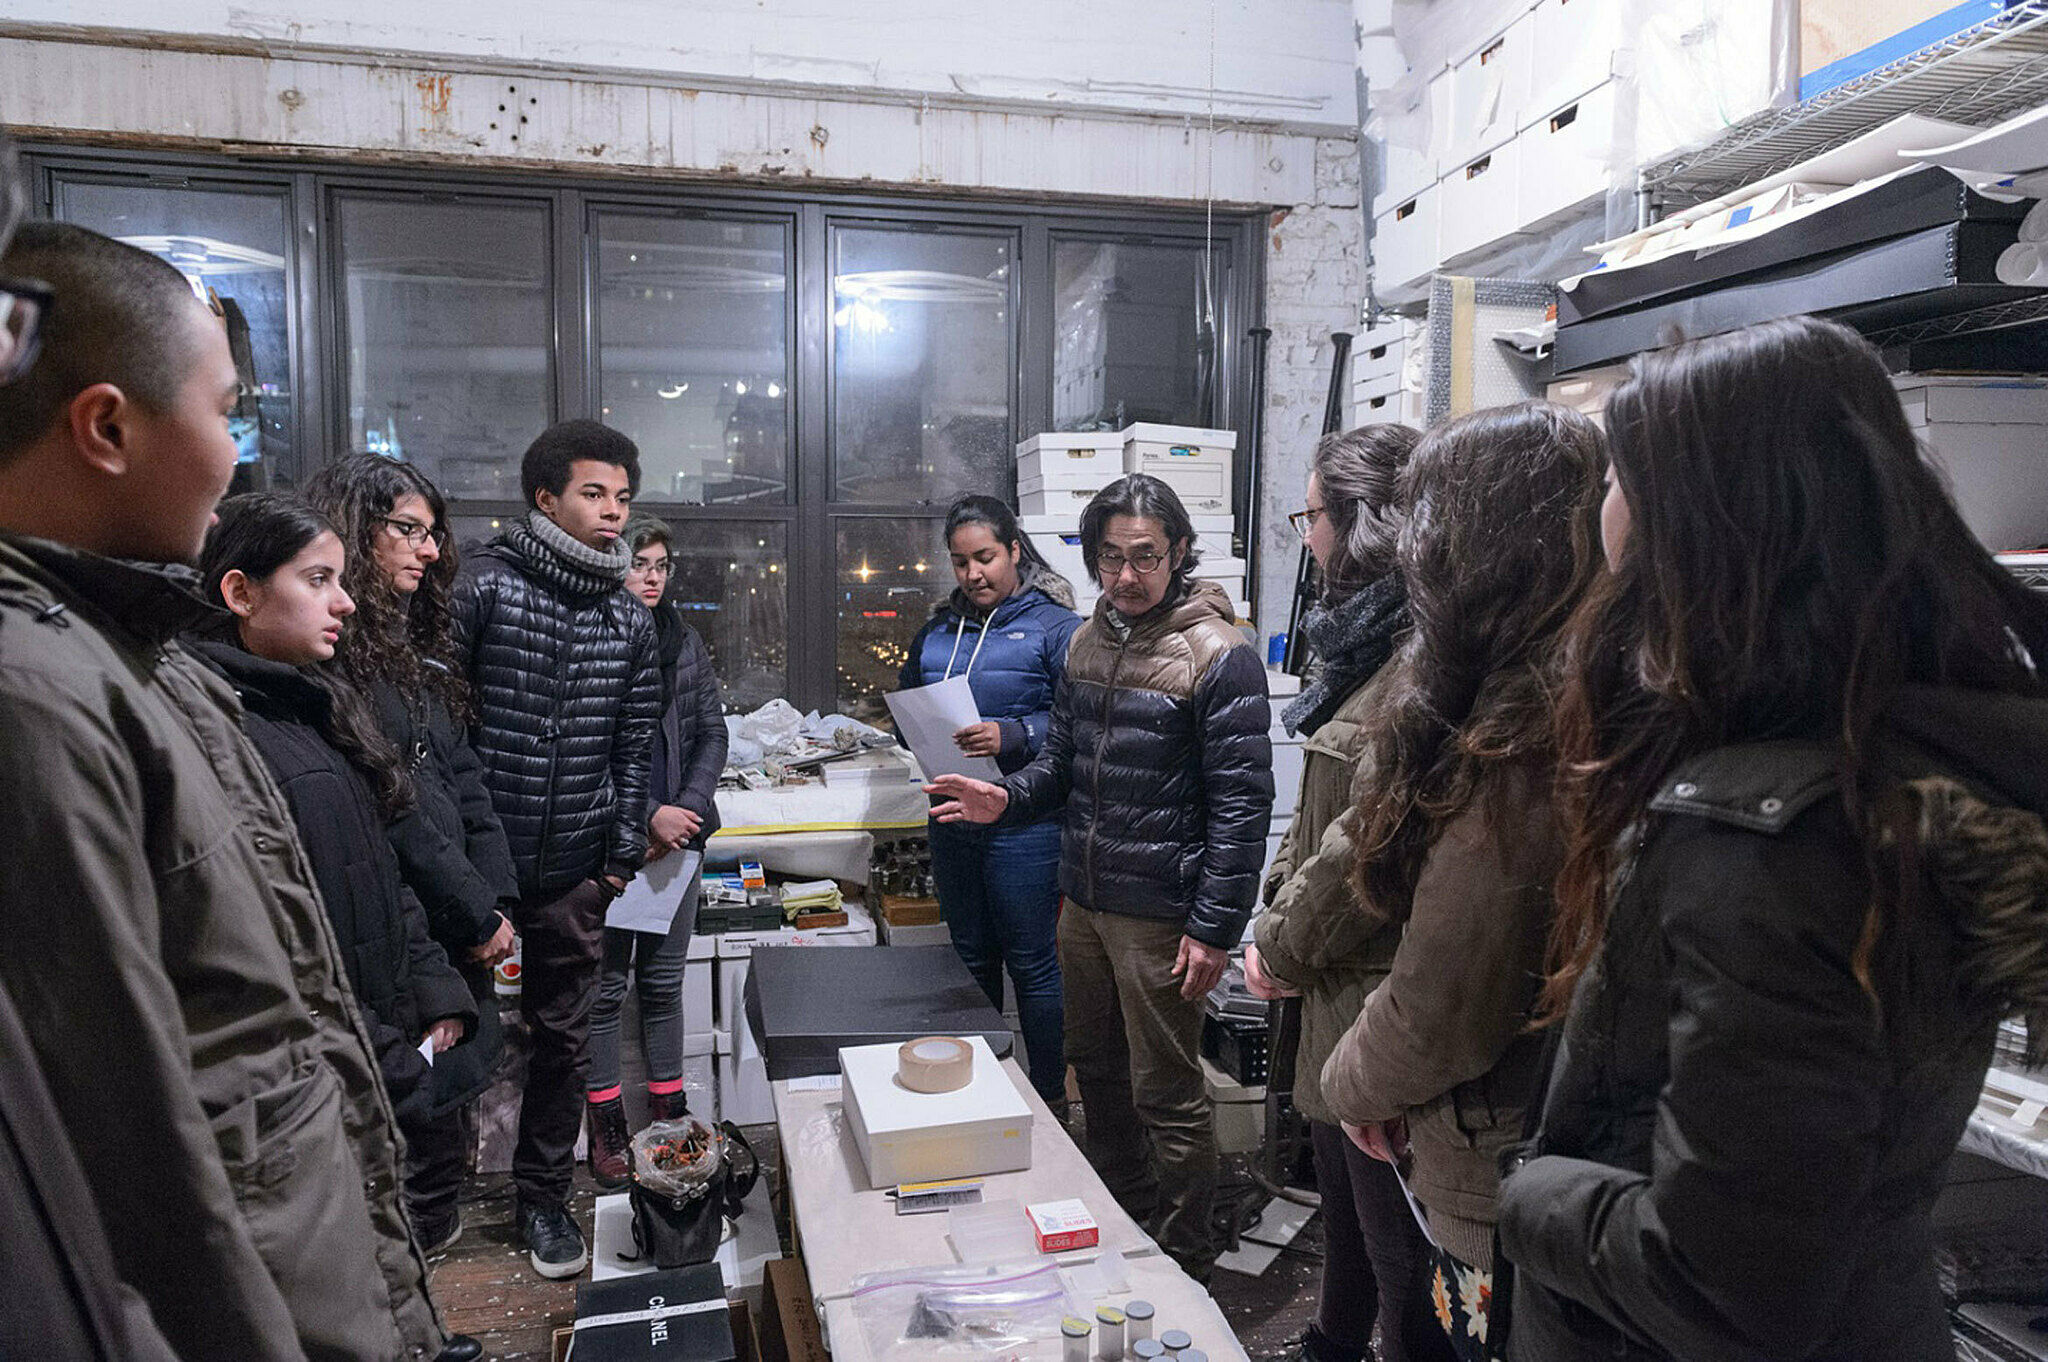 Group discusses artwork in a studio.